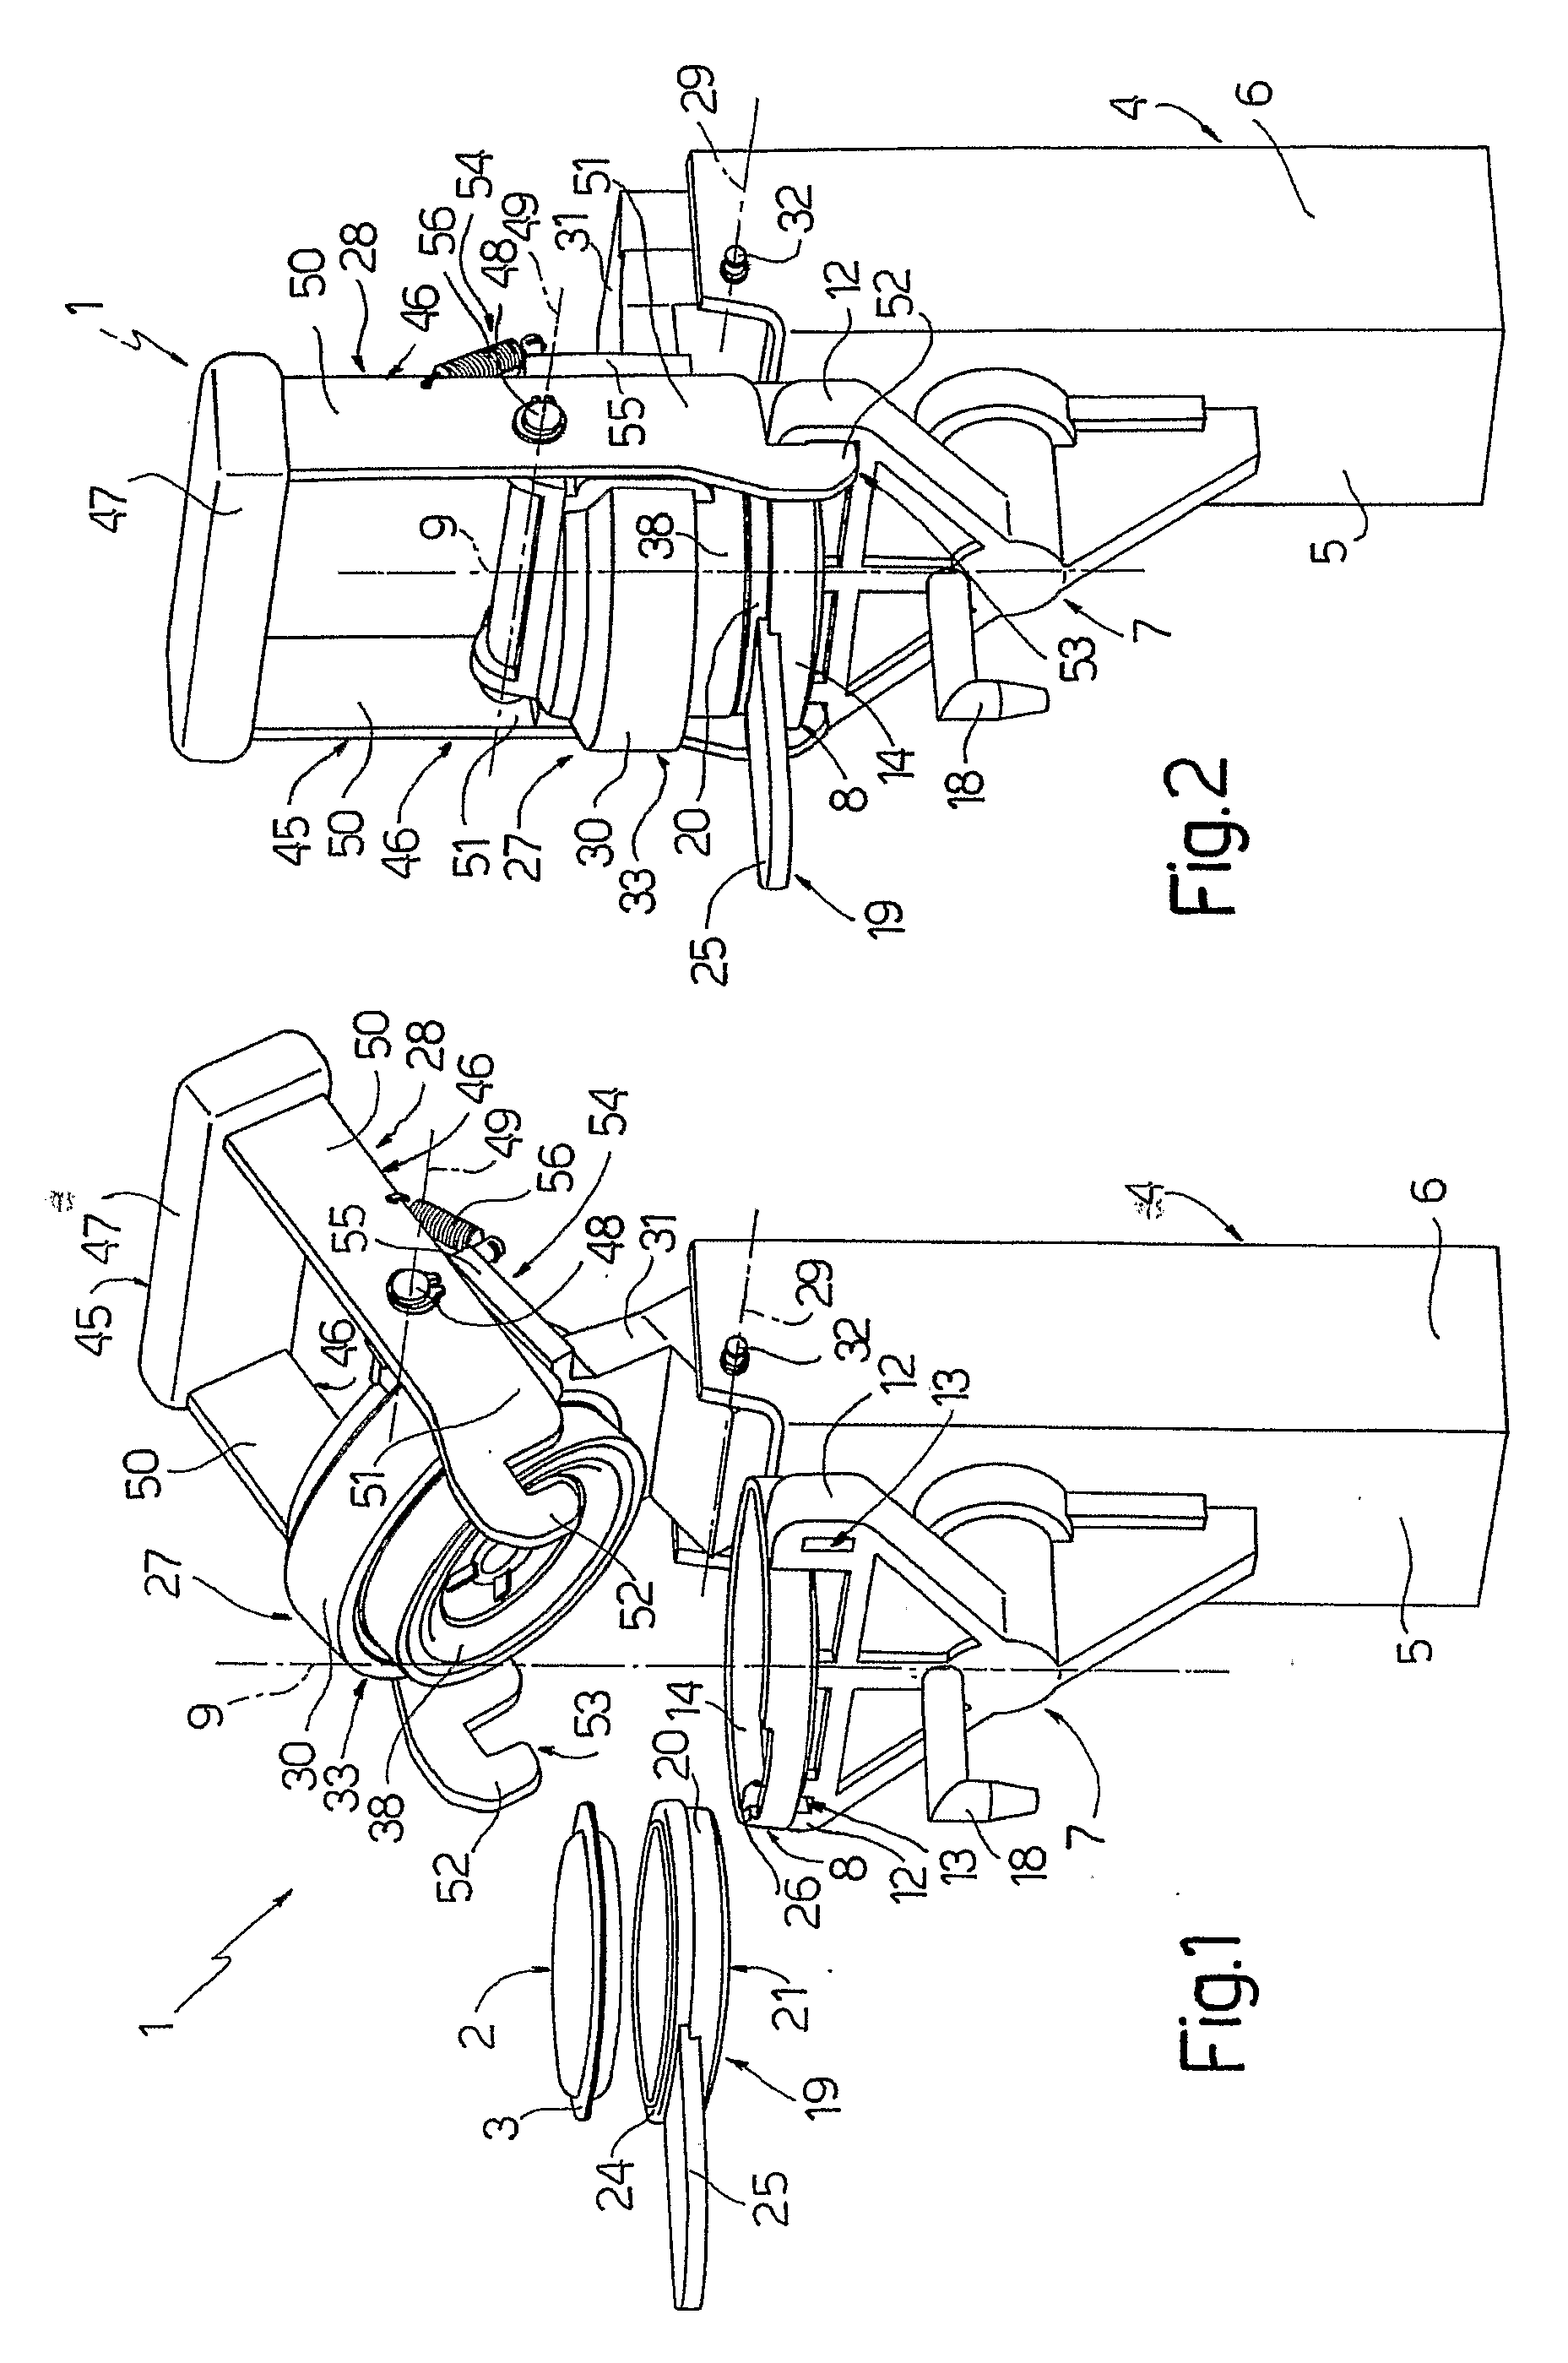 Percolator For Producing A Beverage From Powdered Material In A Container